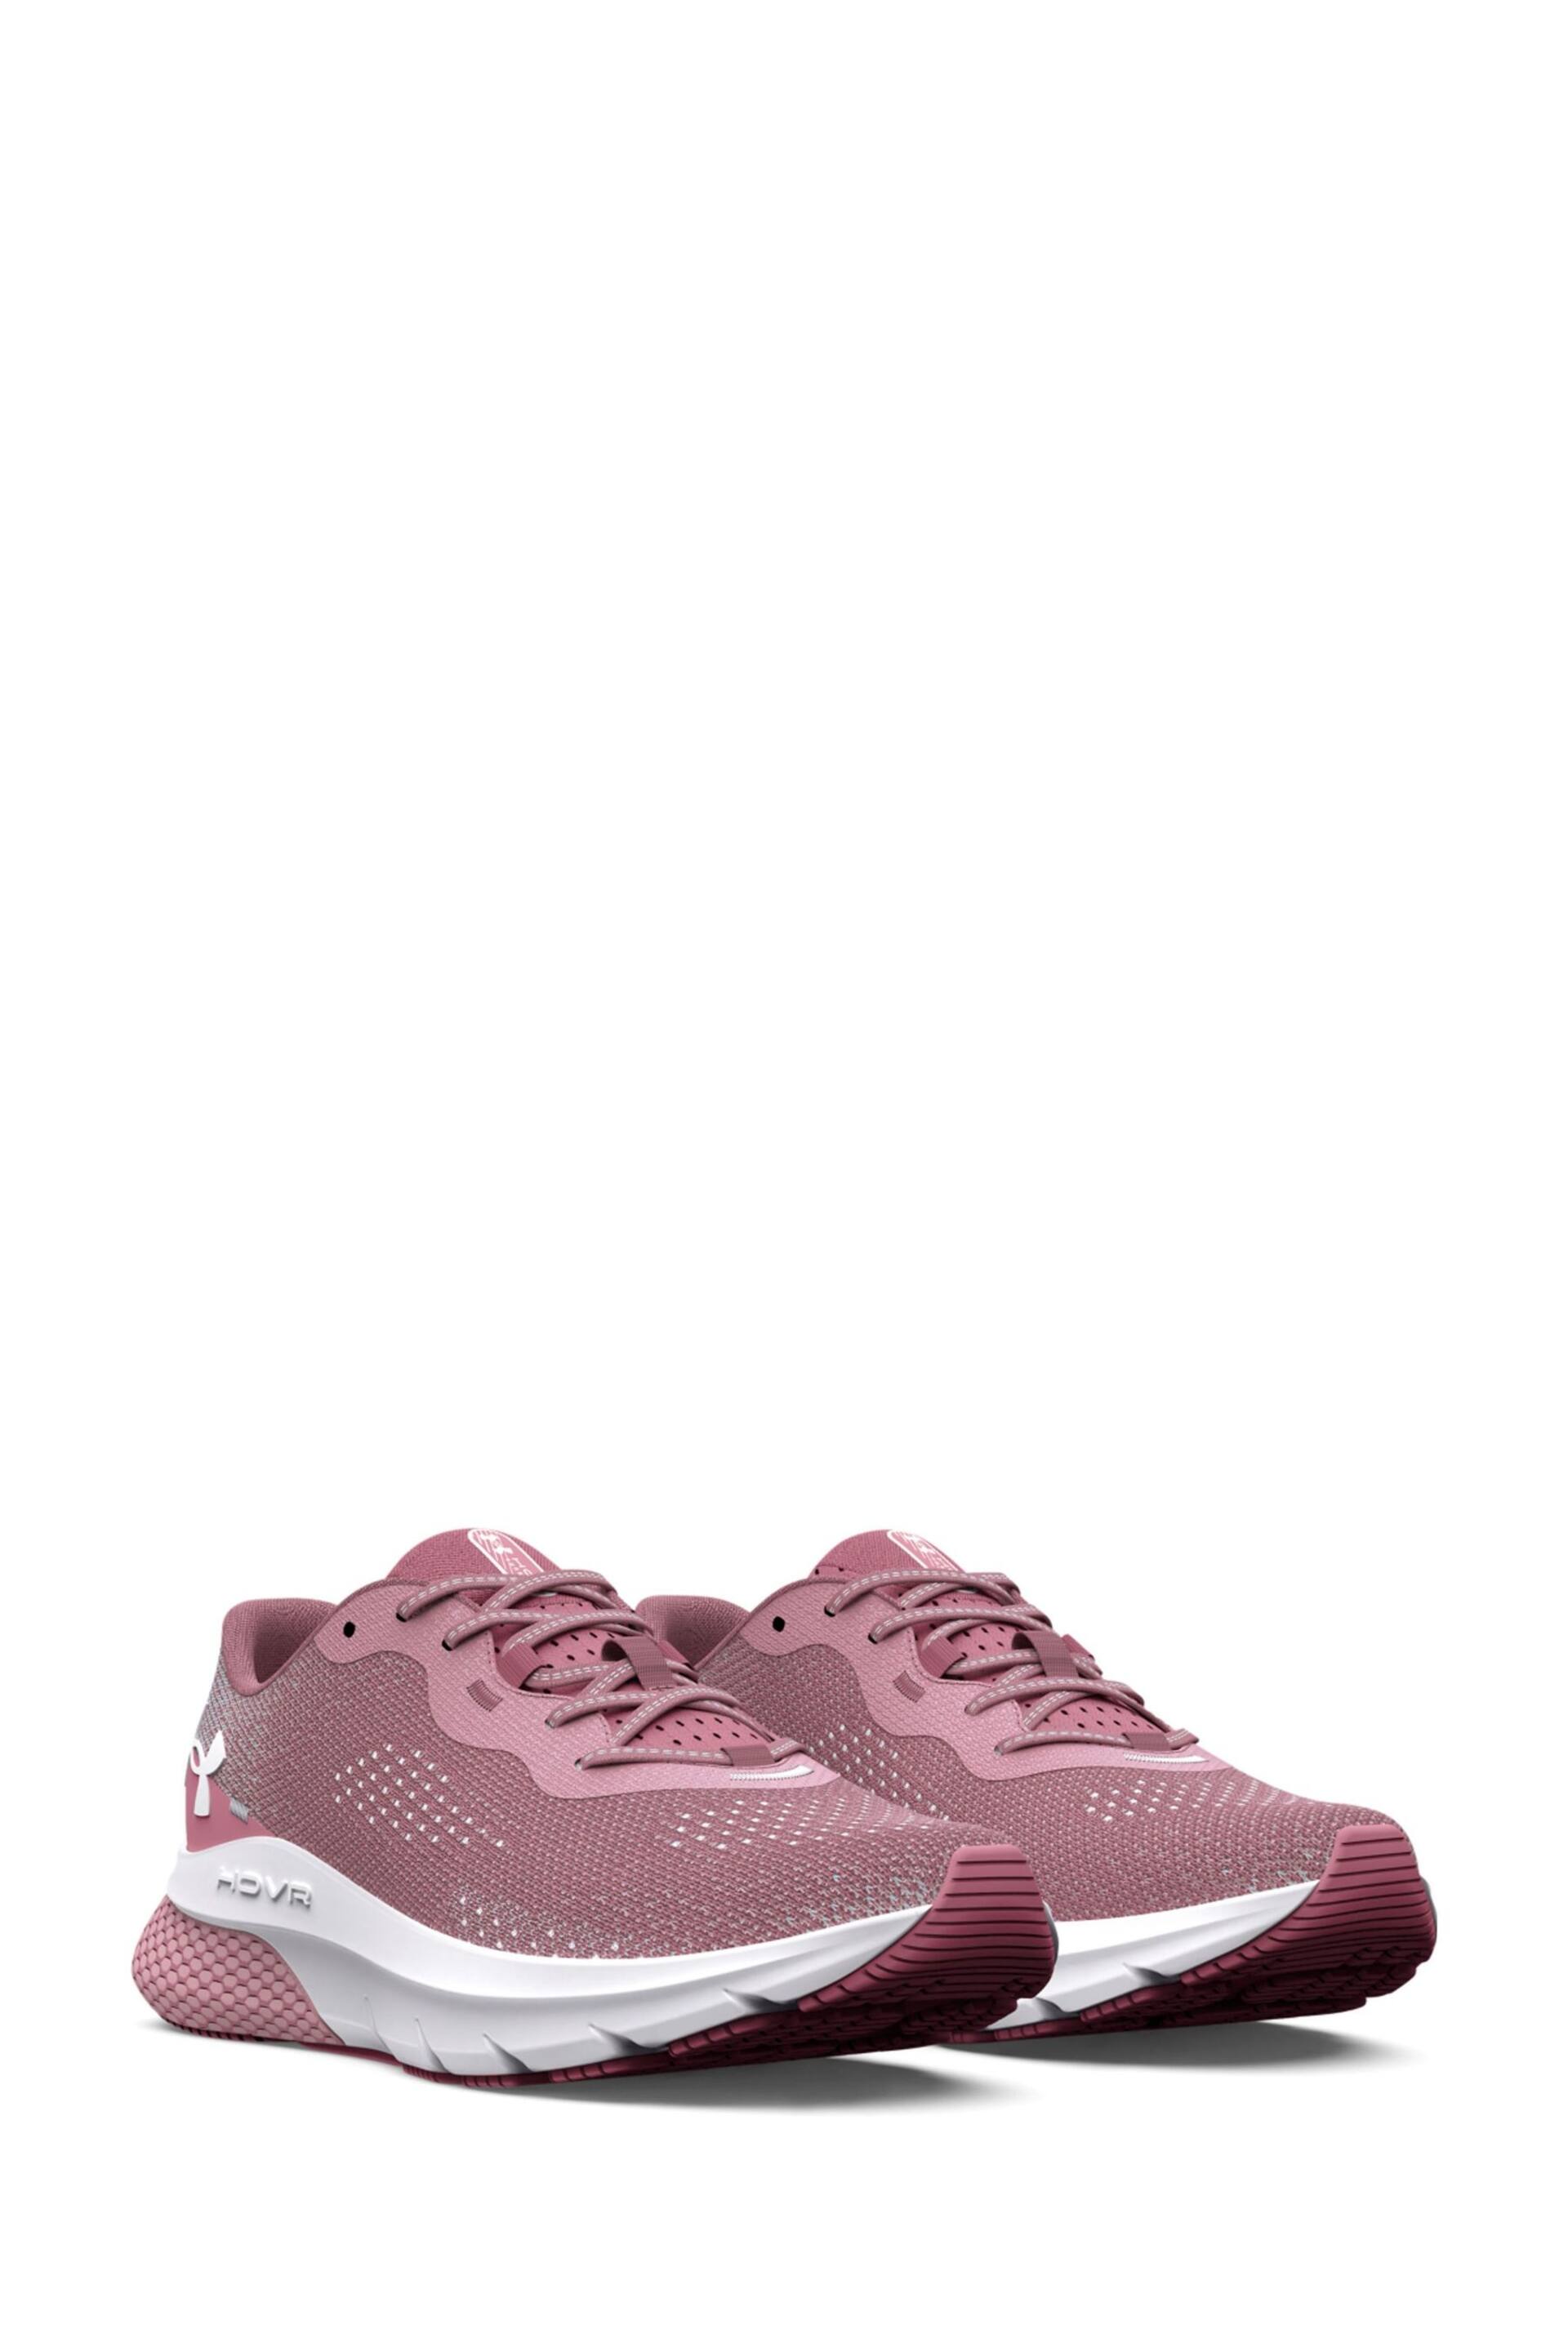 Under Armour Pink HOVR Turbulence 2 Trainers - Image 6 of 8